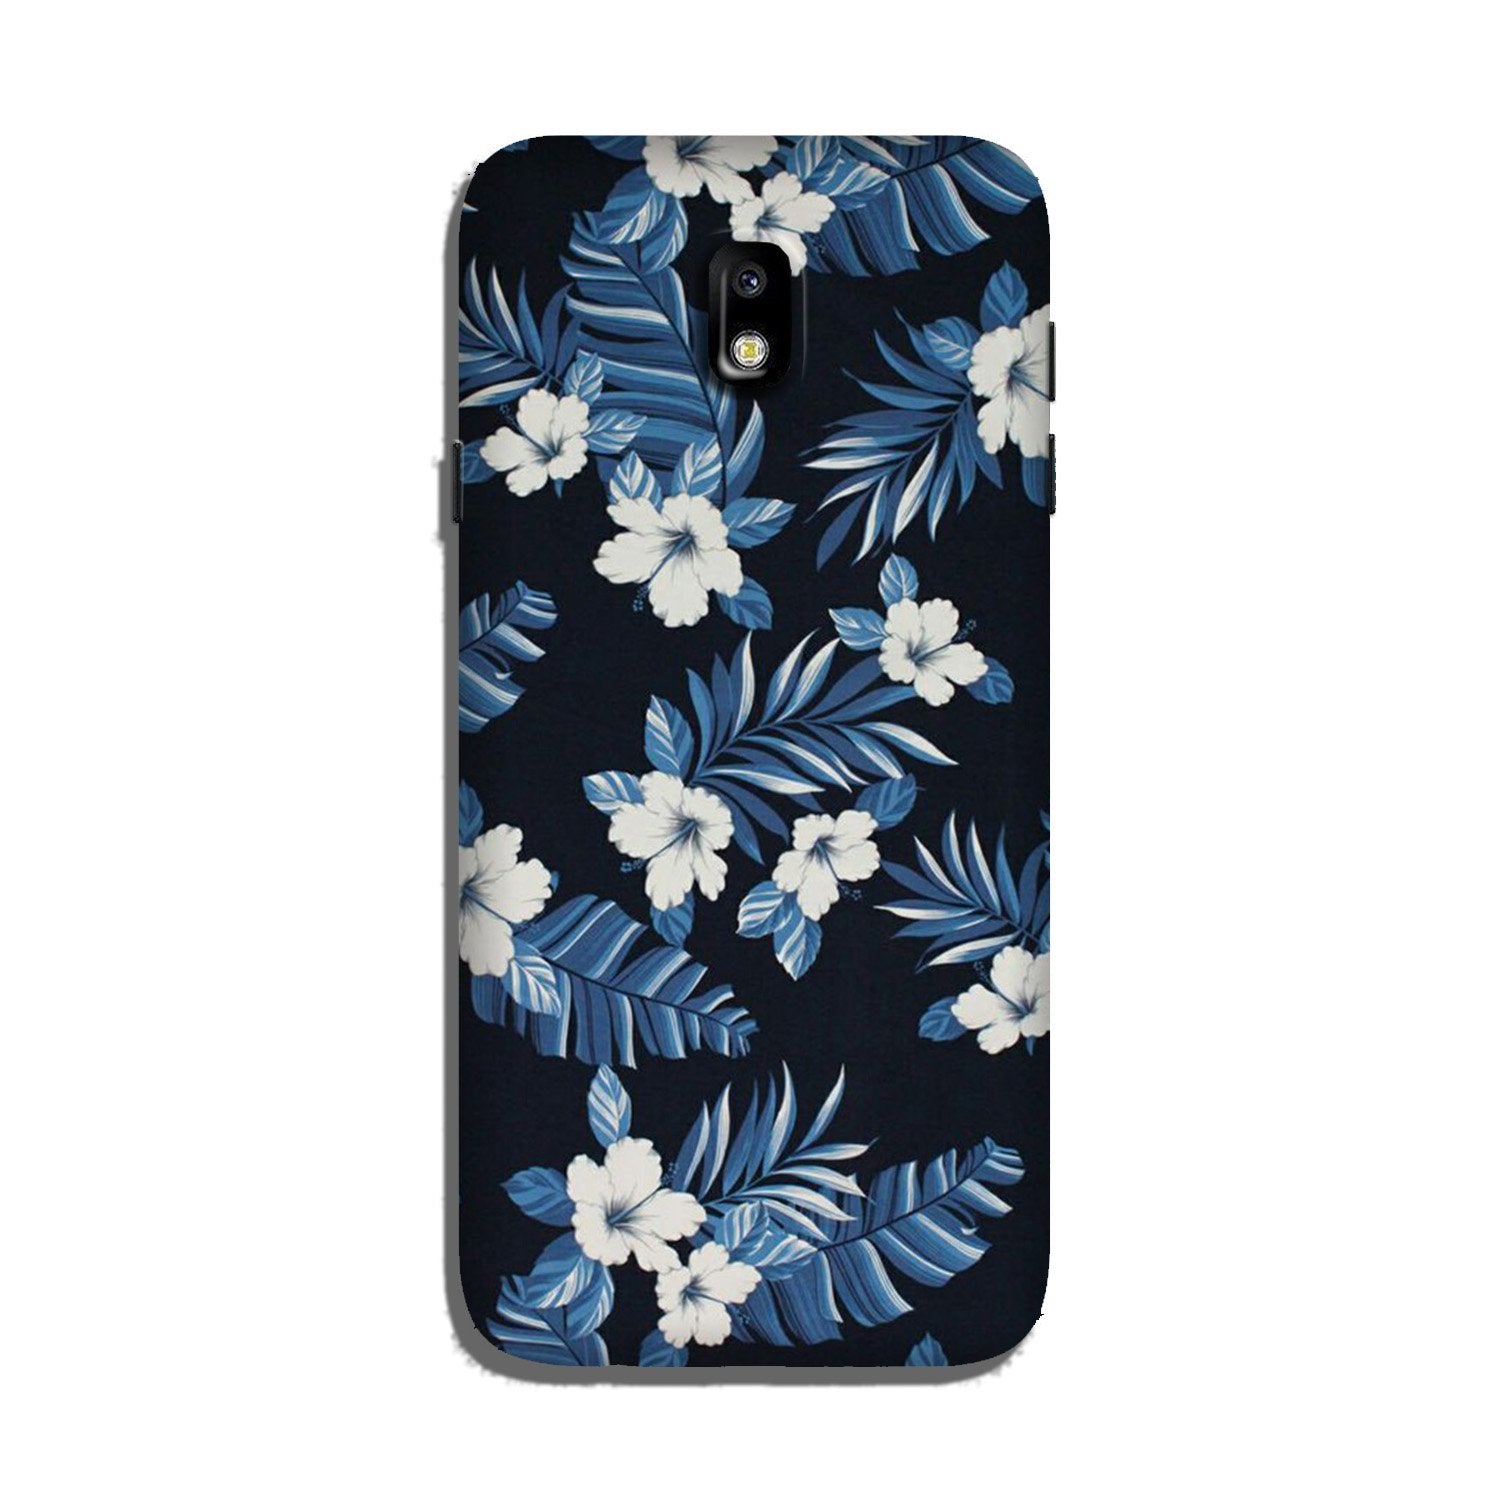 White flowers Blue Background2 Case for Galaxy J5 Pro